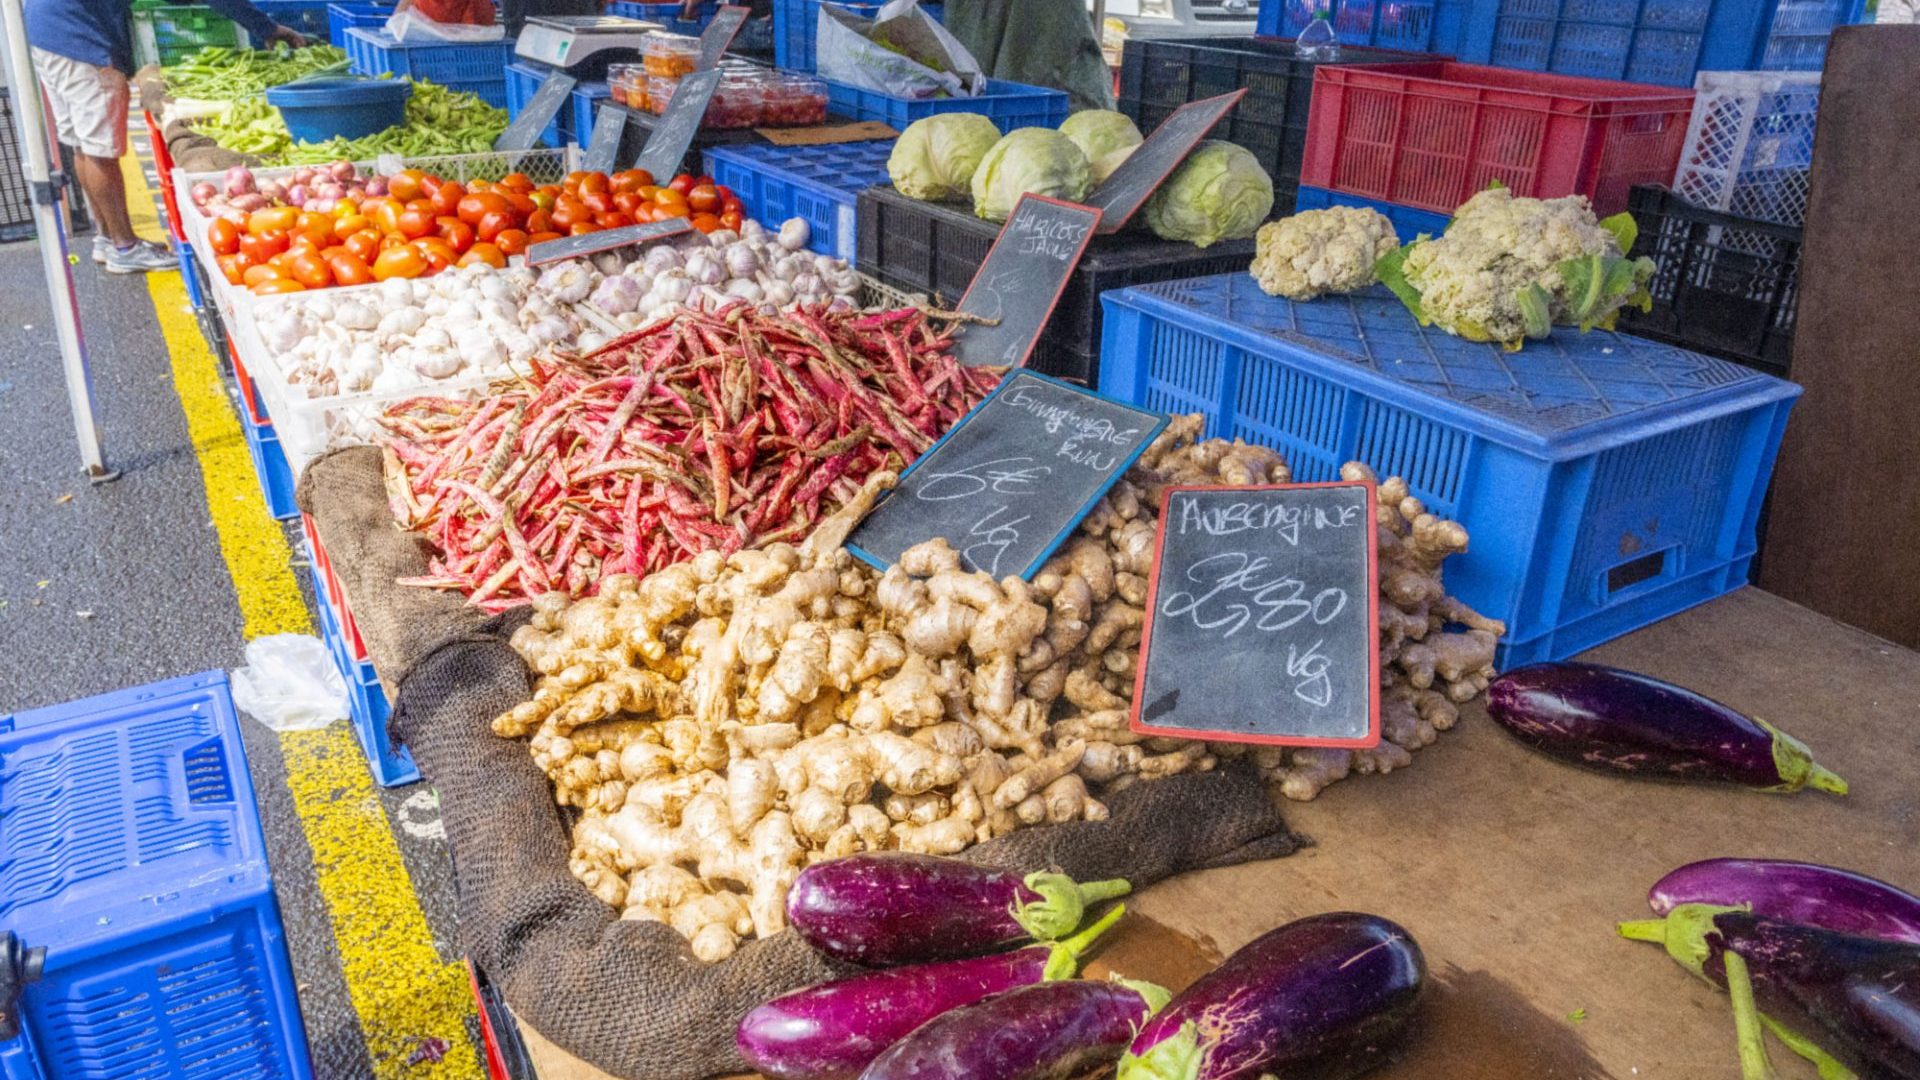 Fruits and vegetables on the stalls of a fairground market in the east of Reunion